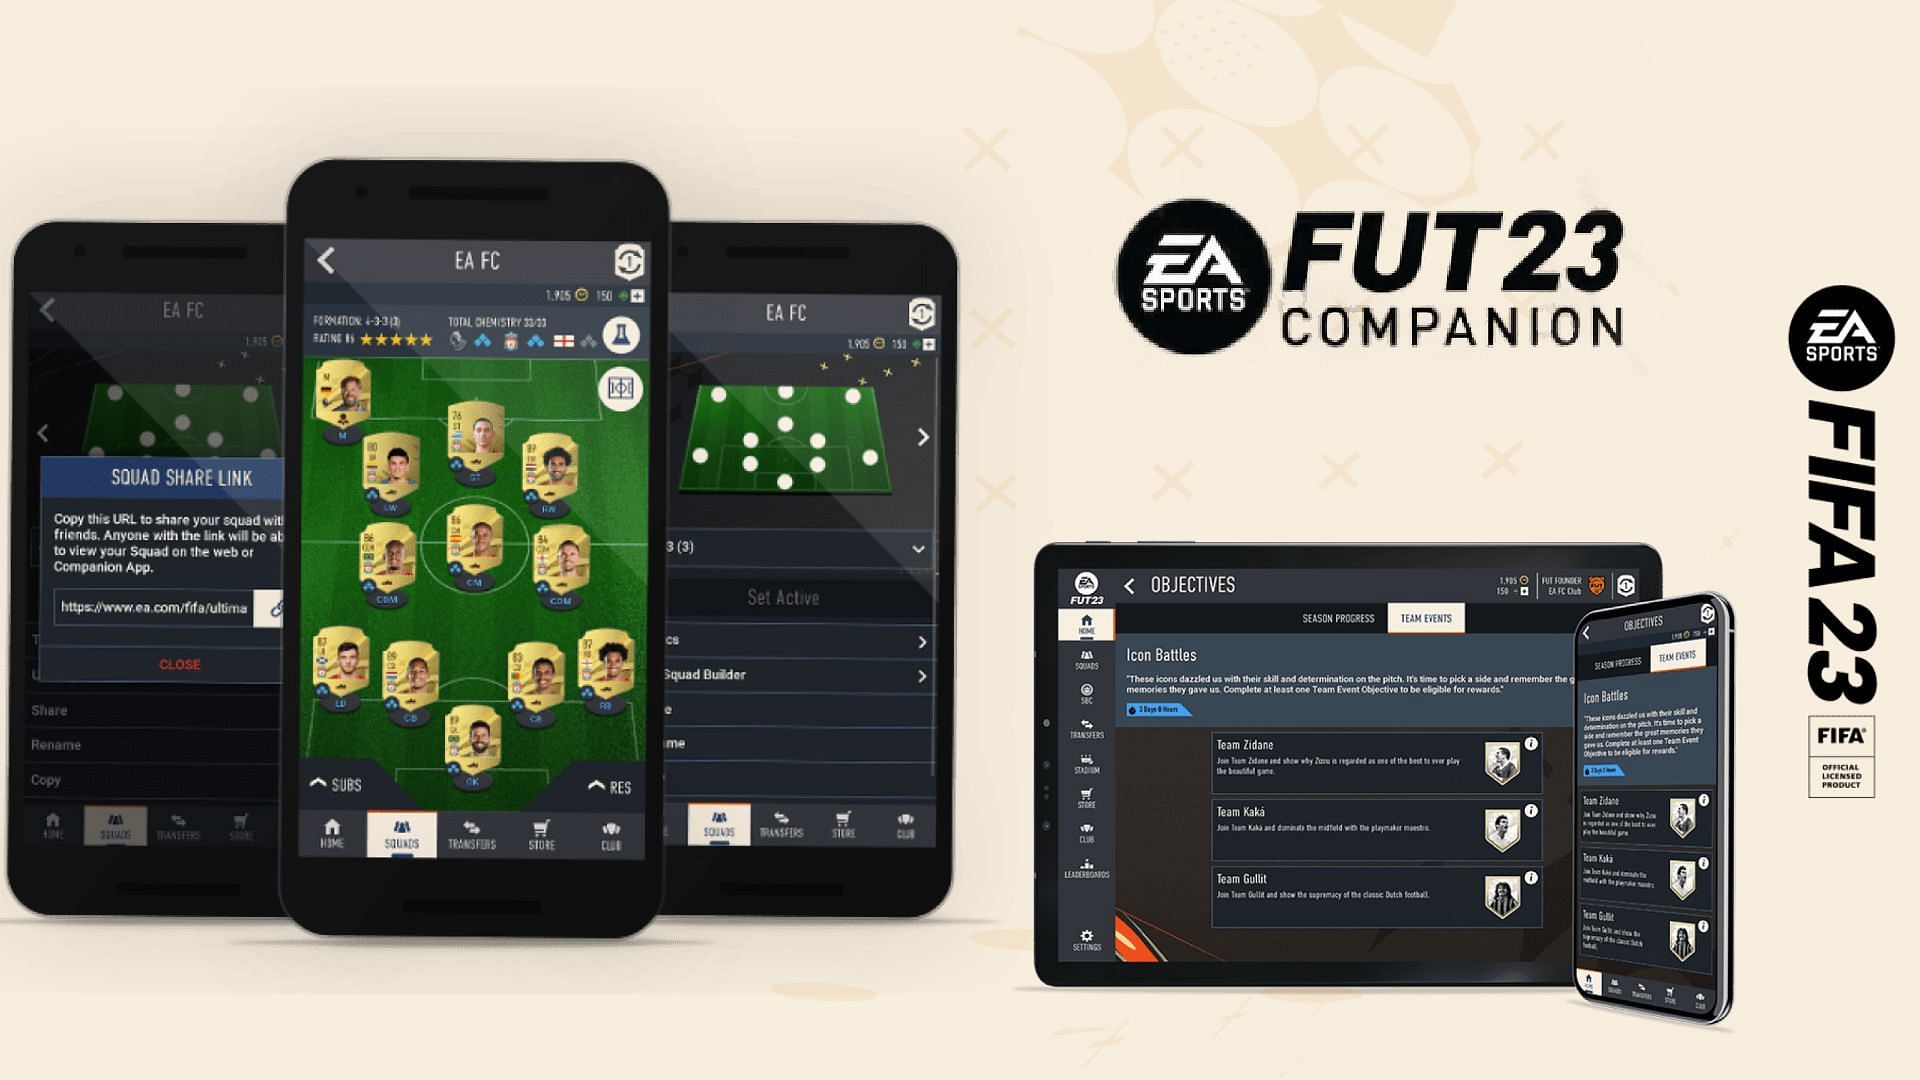 FIFA 23 guide How to download the companion app and register your Ultimate Team squad?